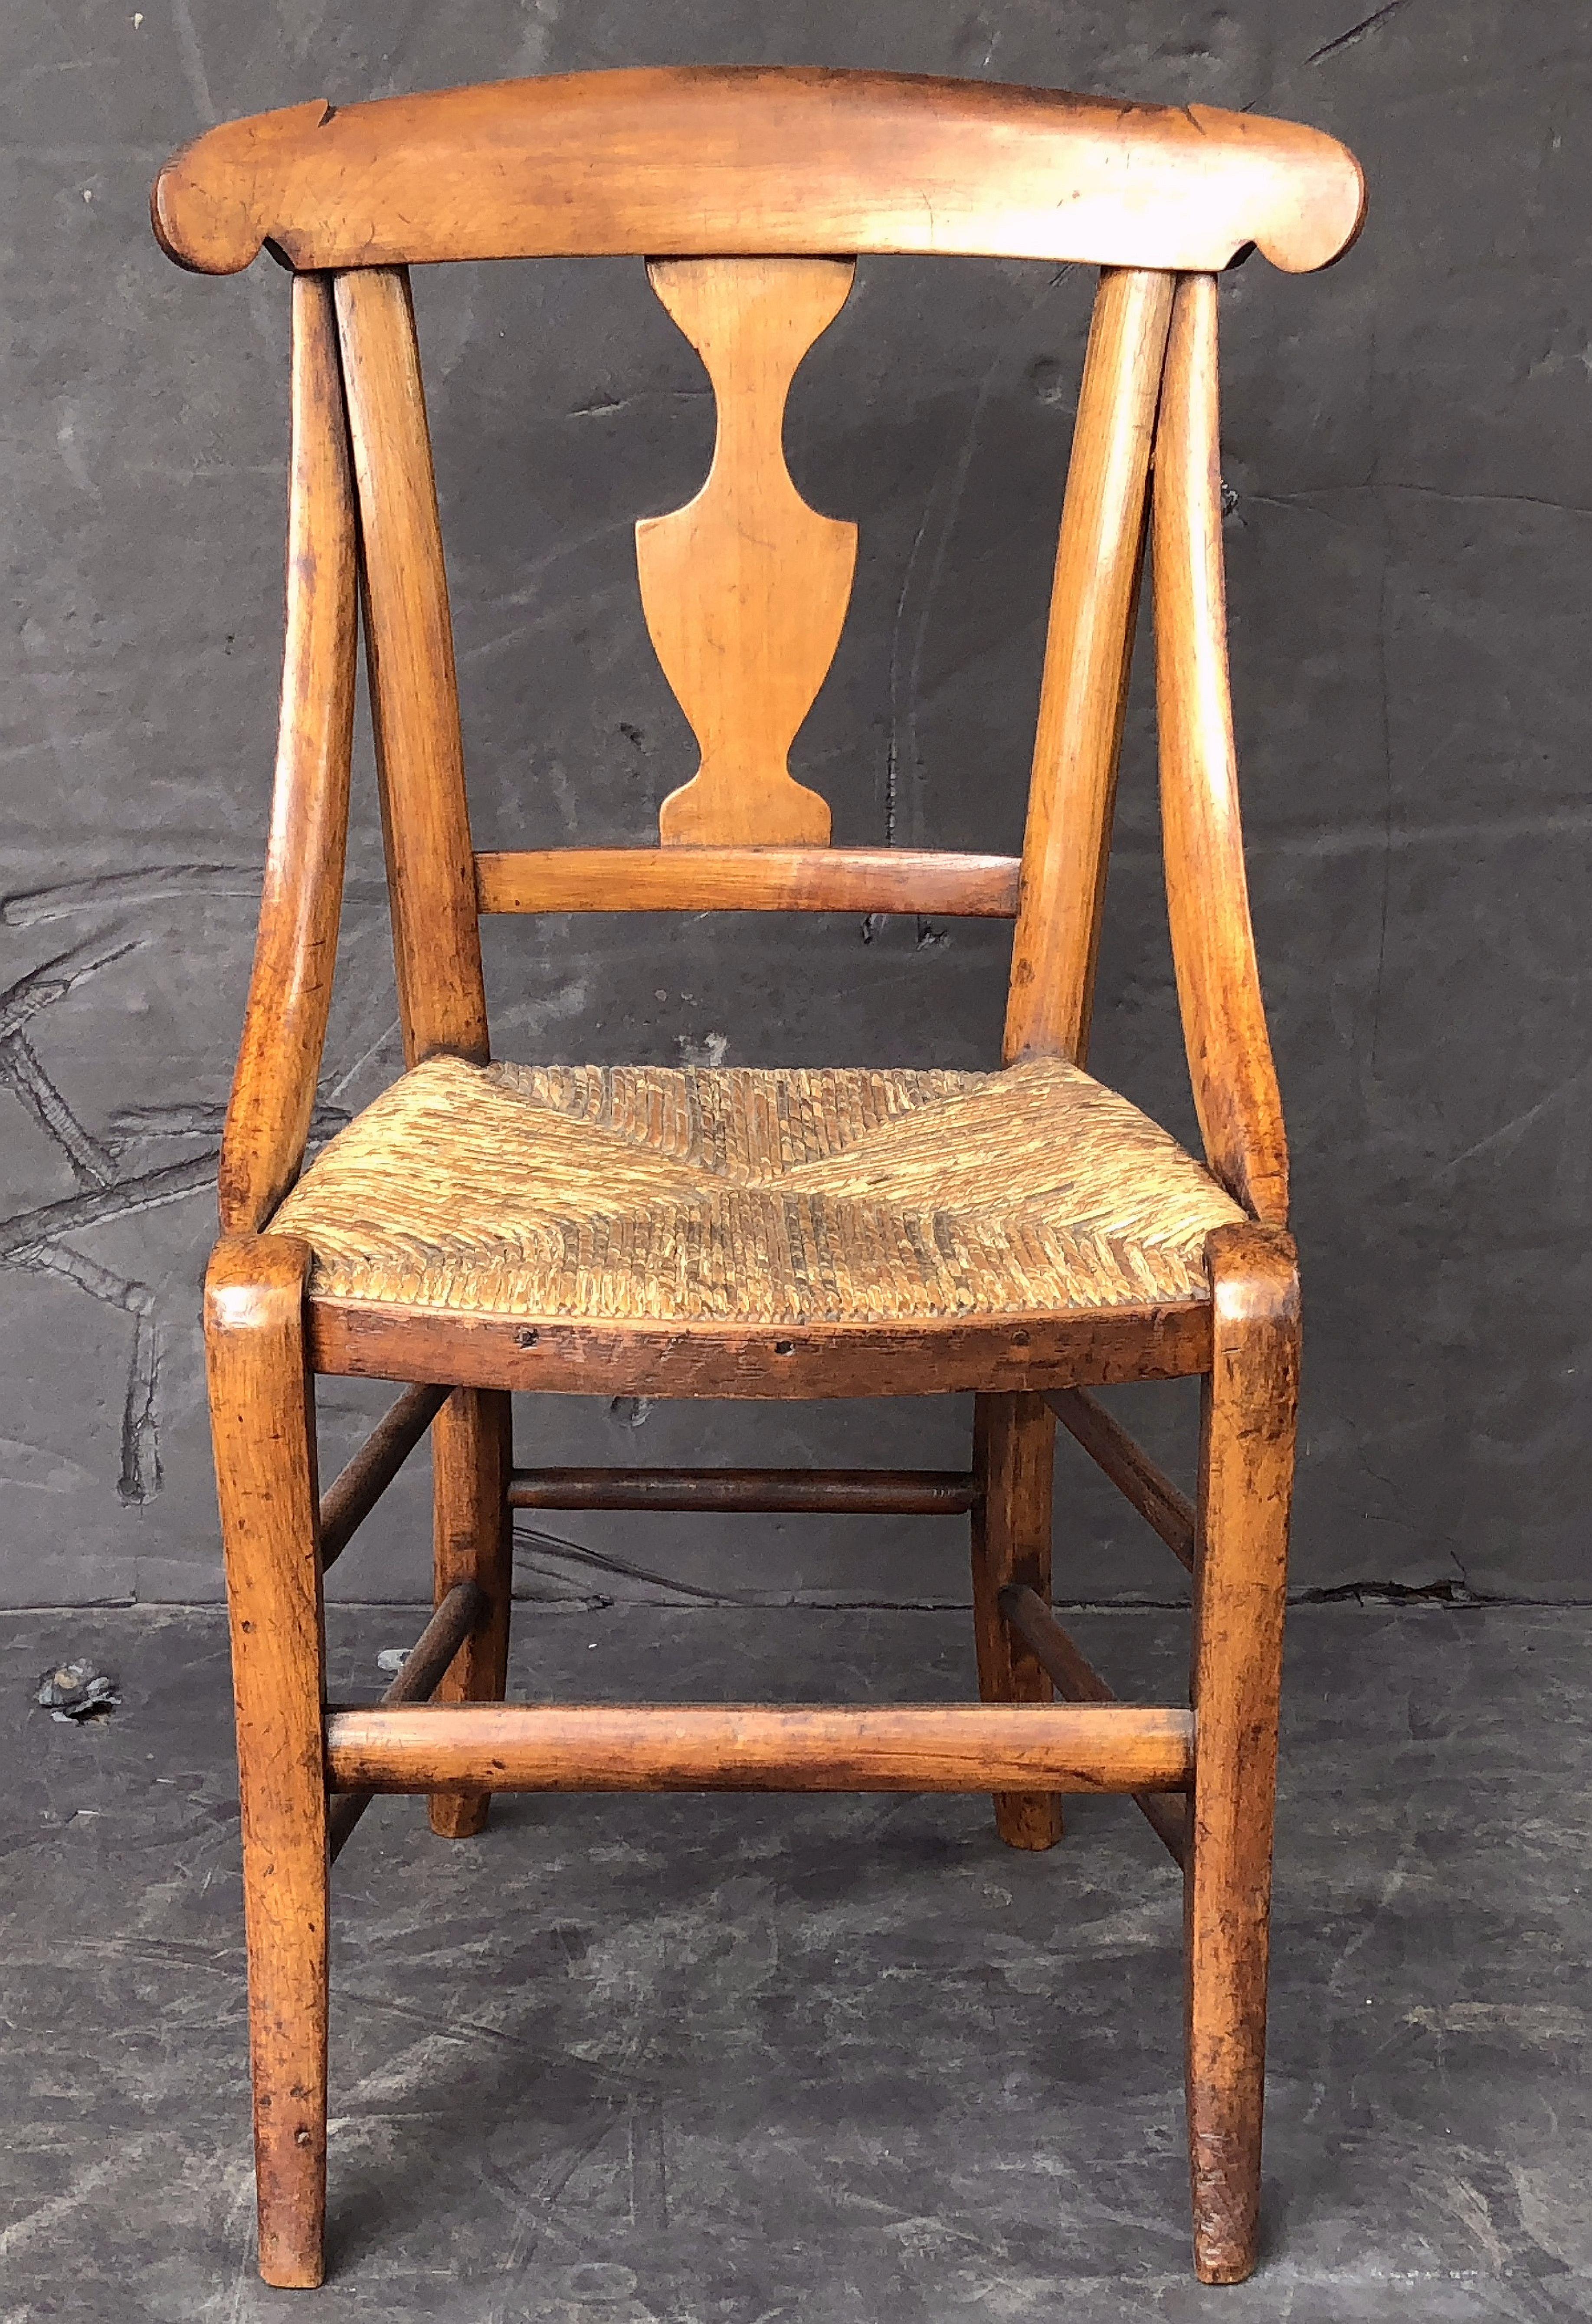 A fine English child's chair from the 19th century, featuring a handsomely patinated fruitwood frame with splat back and rush seat.